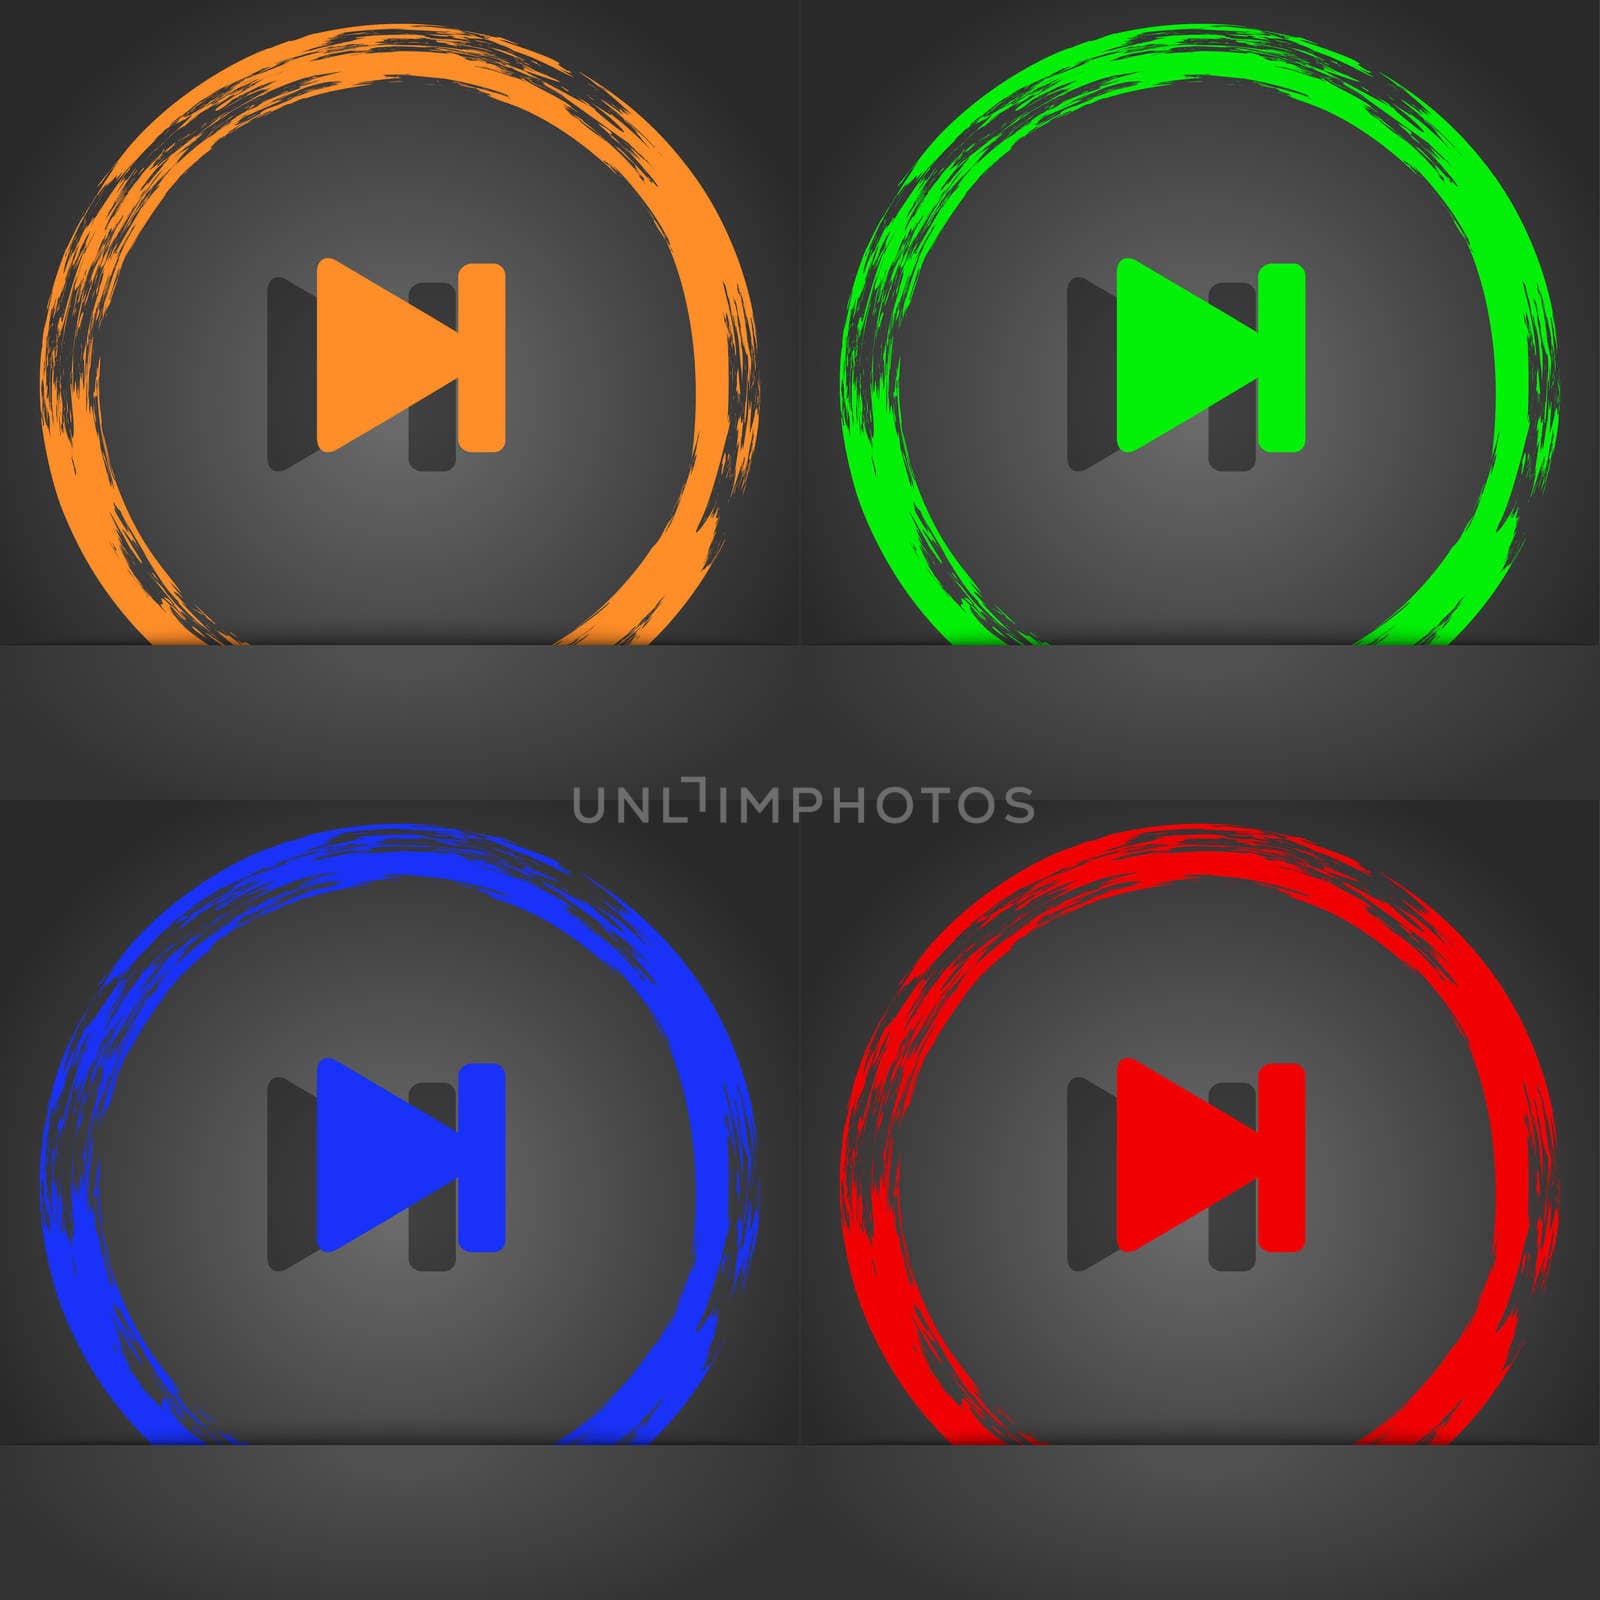 next track icon symbol. Fashionable modern style. In the orange, green, blue, green design.  by serhii_lohvyniuk